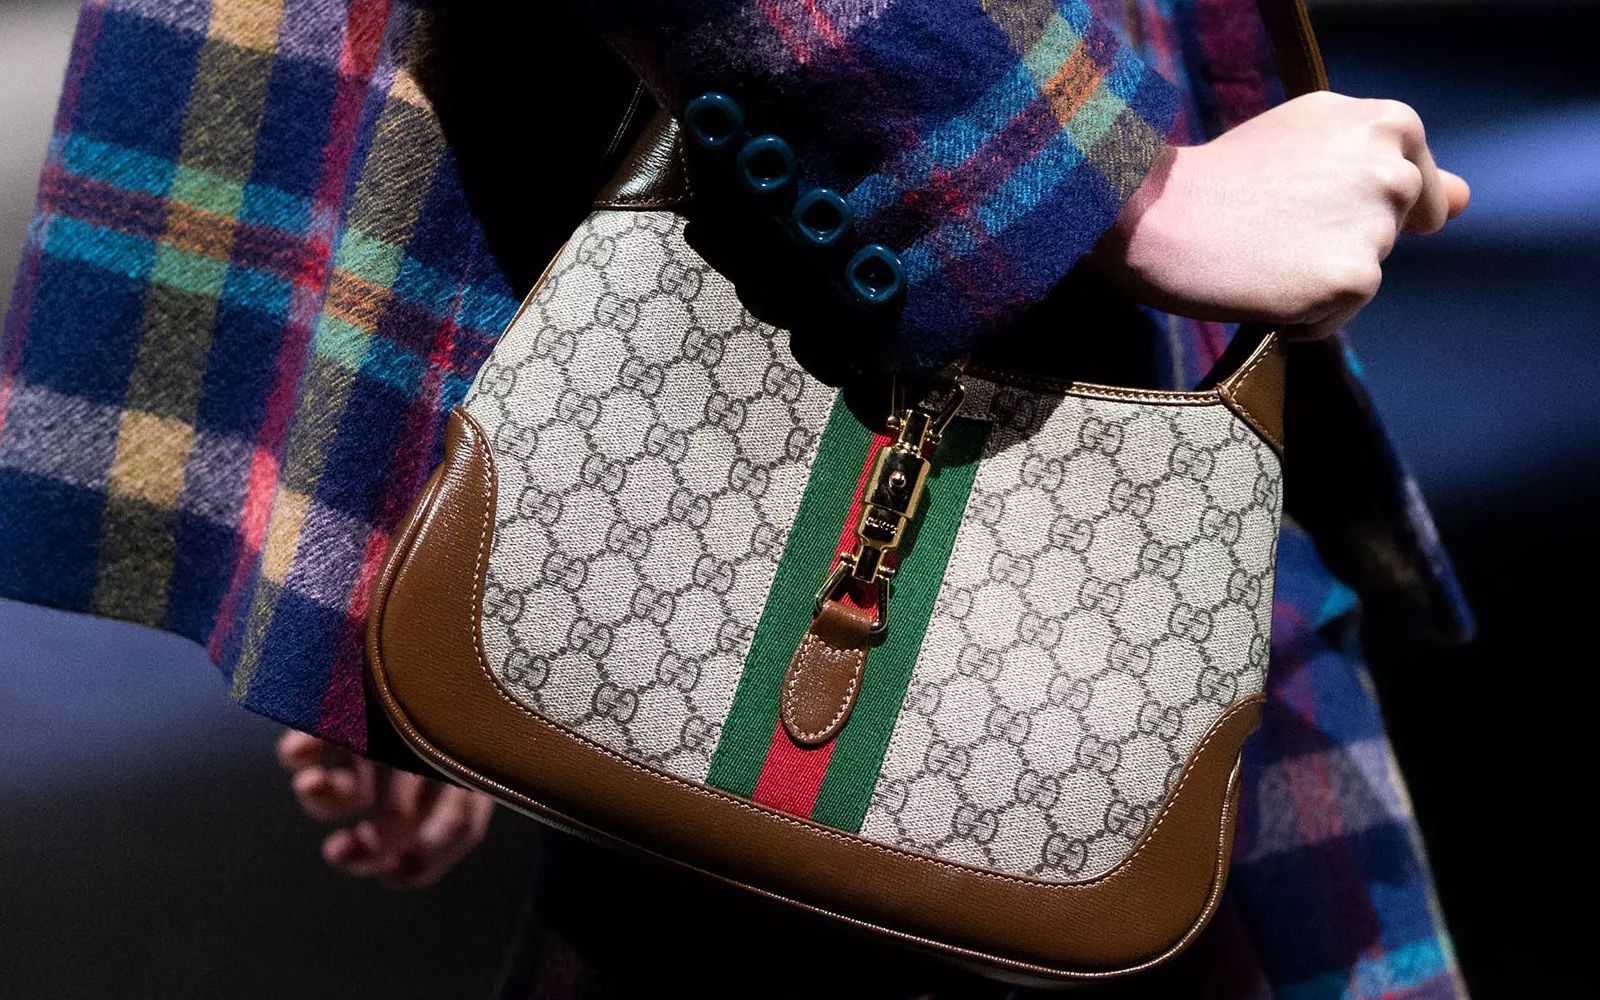 The Louis Vuitton bag that could become a classic - F Luxury Magazine